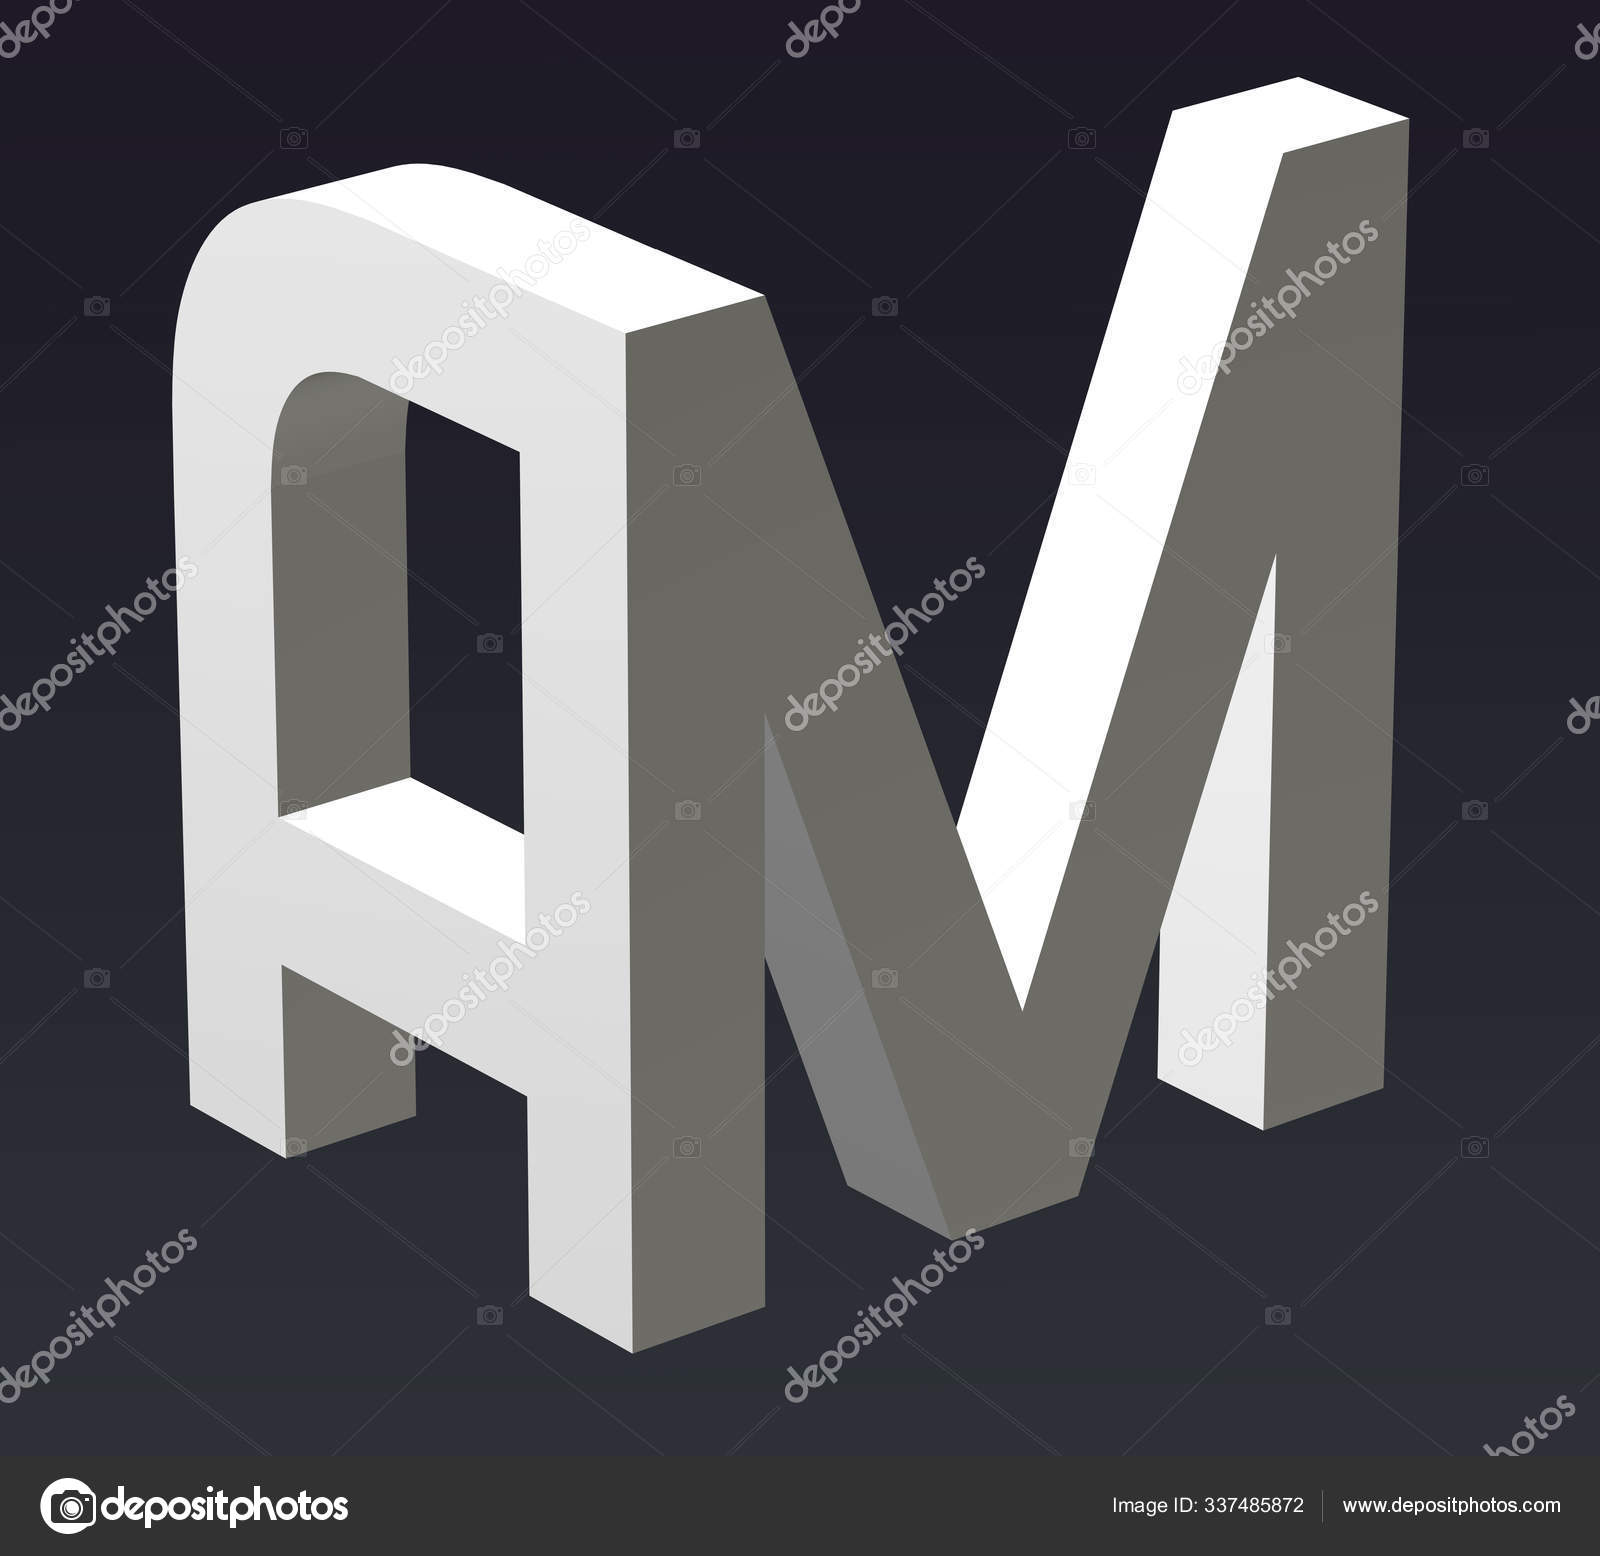 Font Stylization Letters Font Composition Logo Rendering Stock Photo Image By C 0123omar 337485872